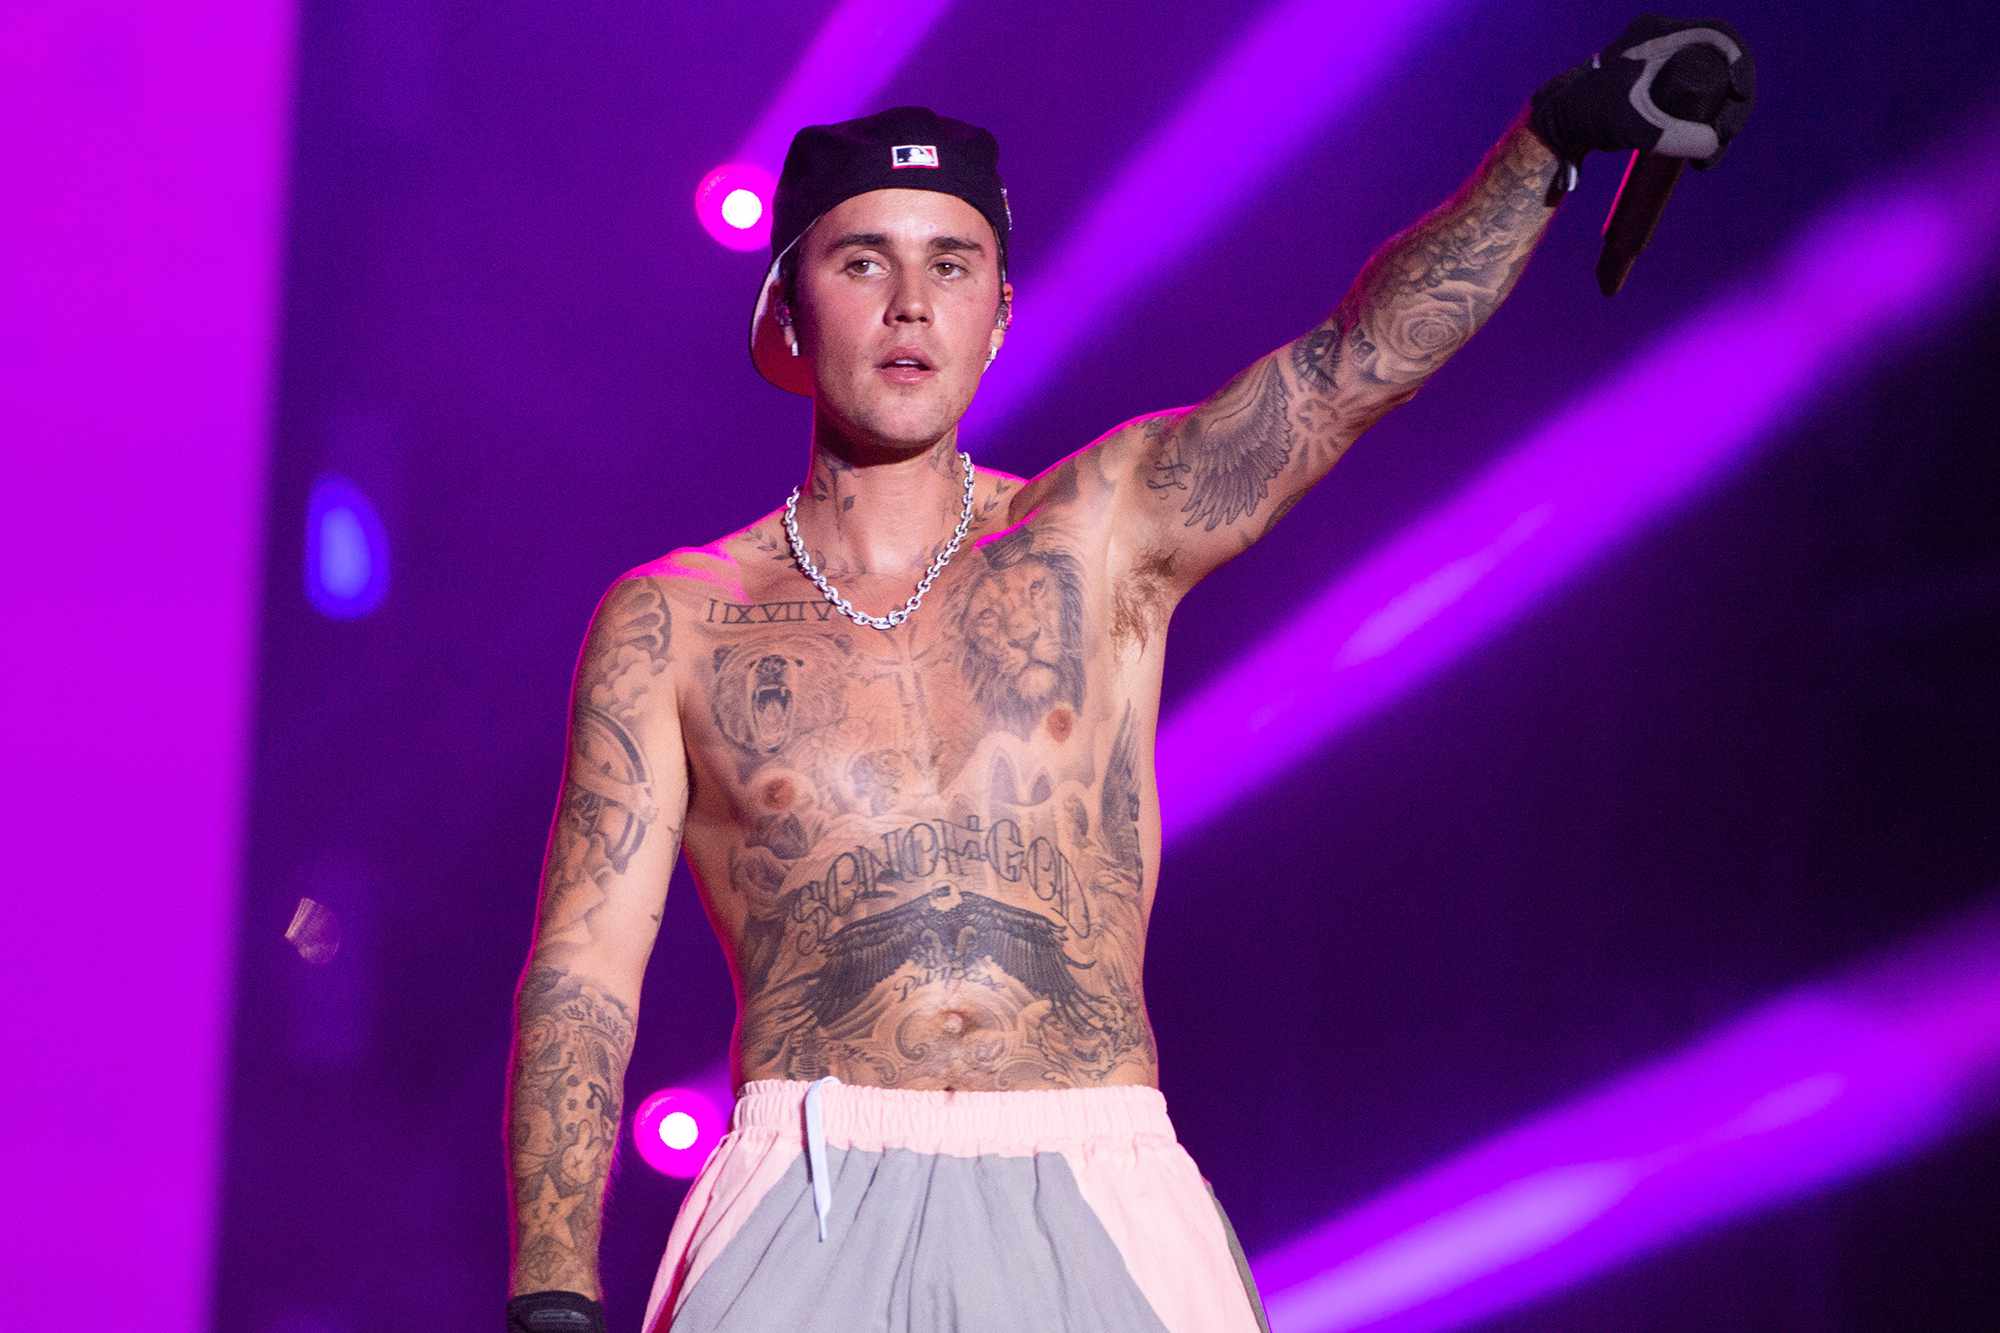 Justin Bieber performs on day three of Sziget Festival 2022 on budai-sziget Island on August 12, 2022 in Budapest, Hungary.